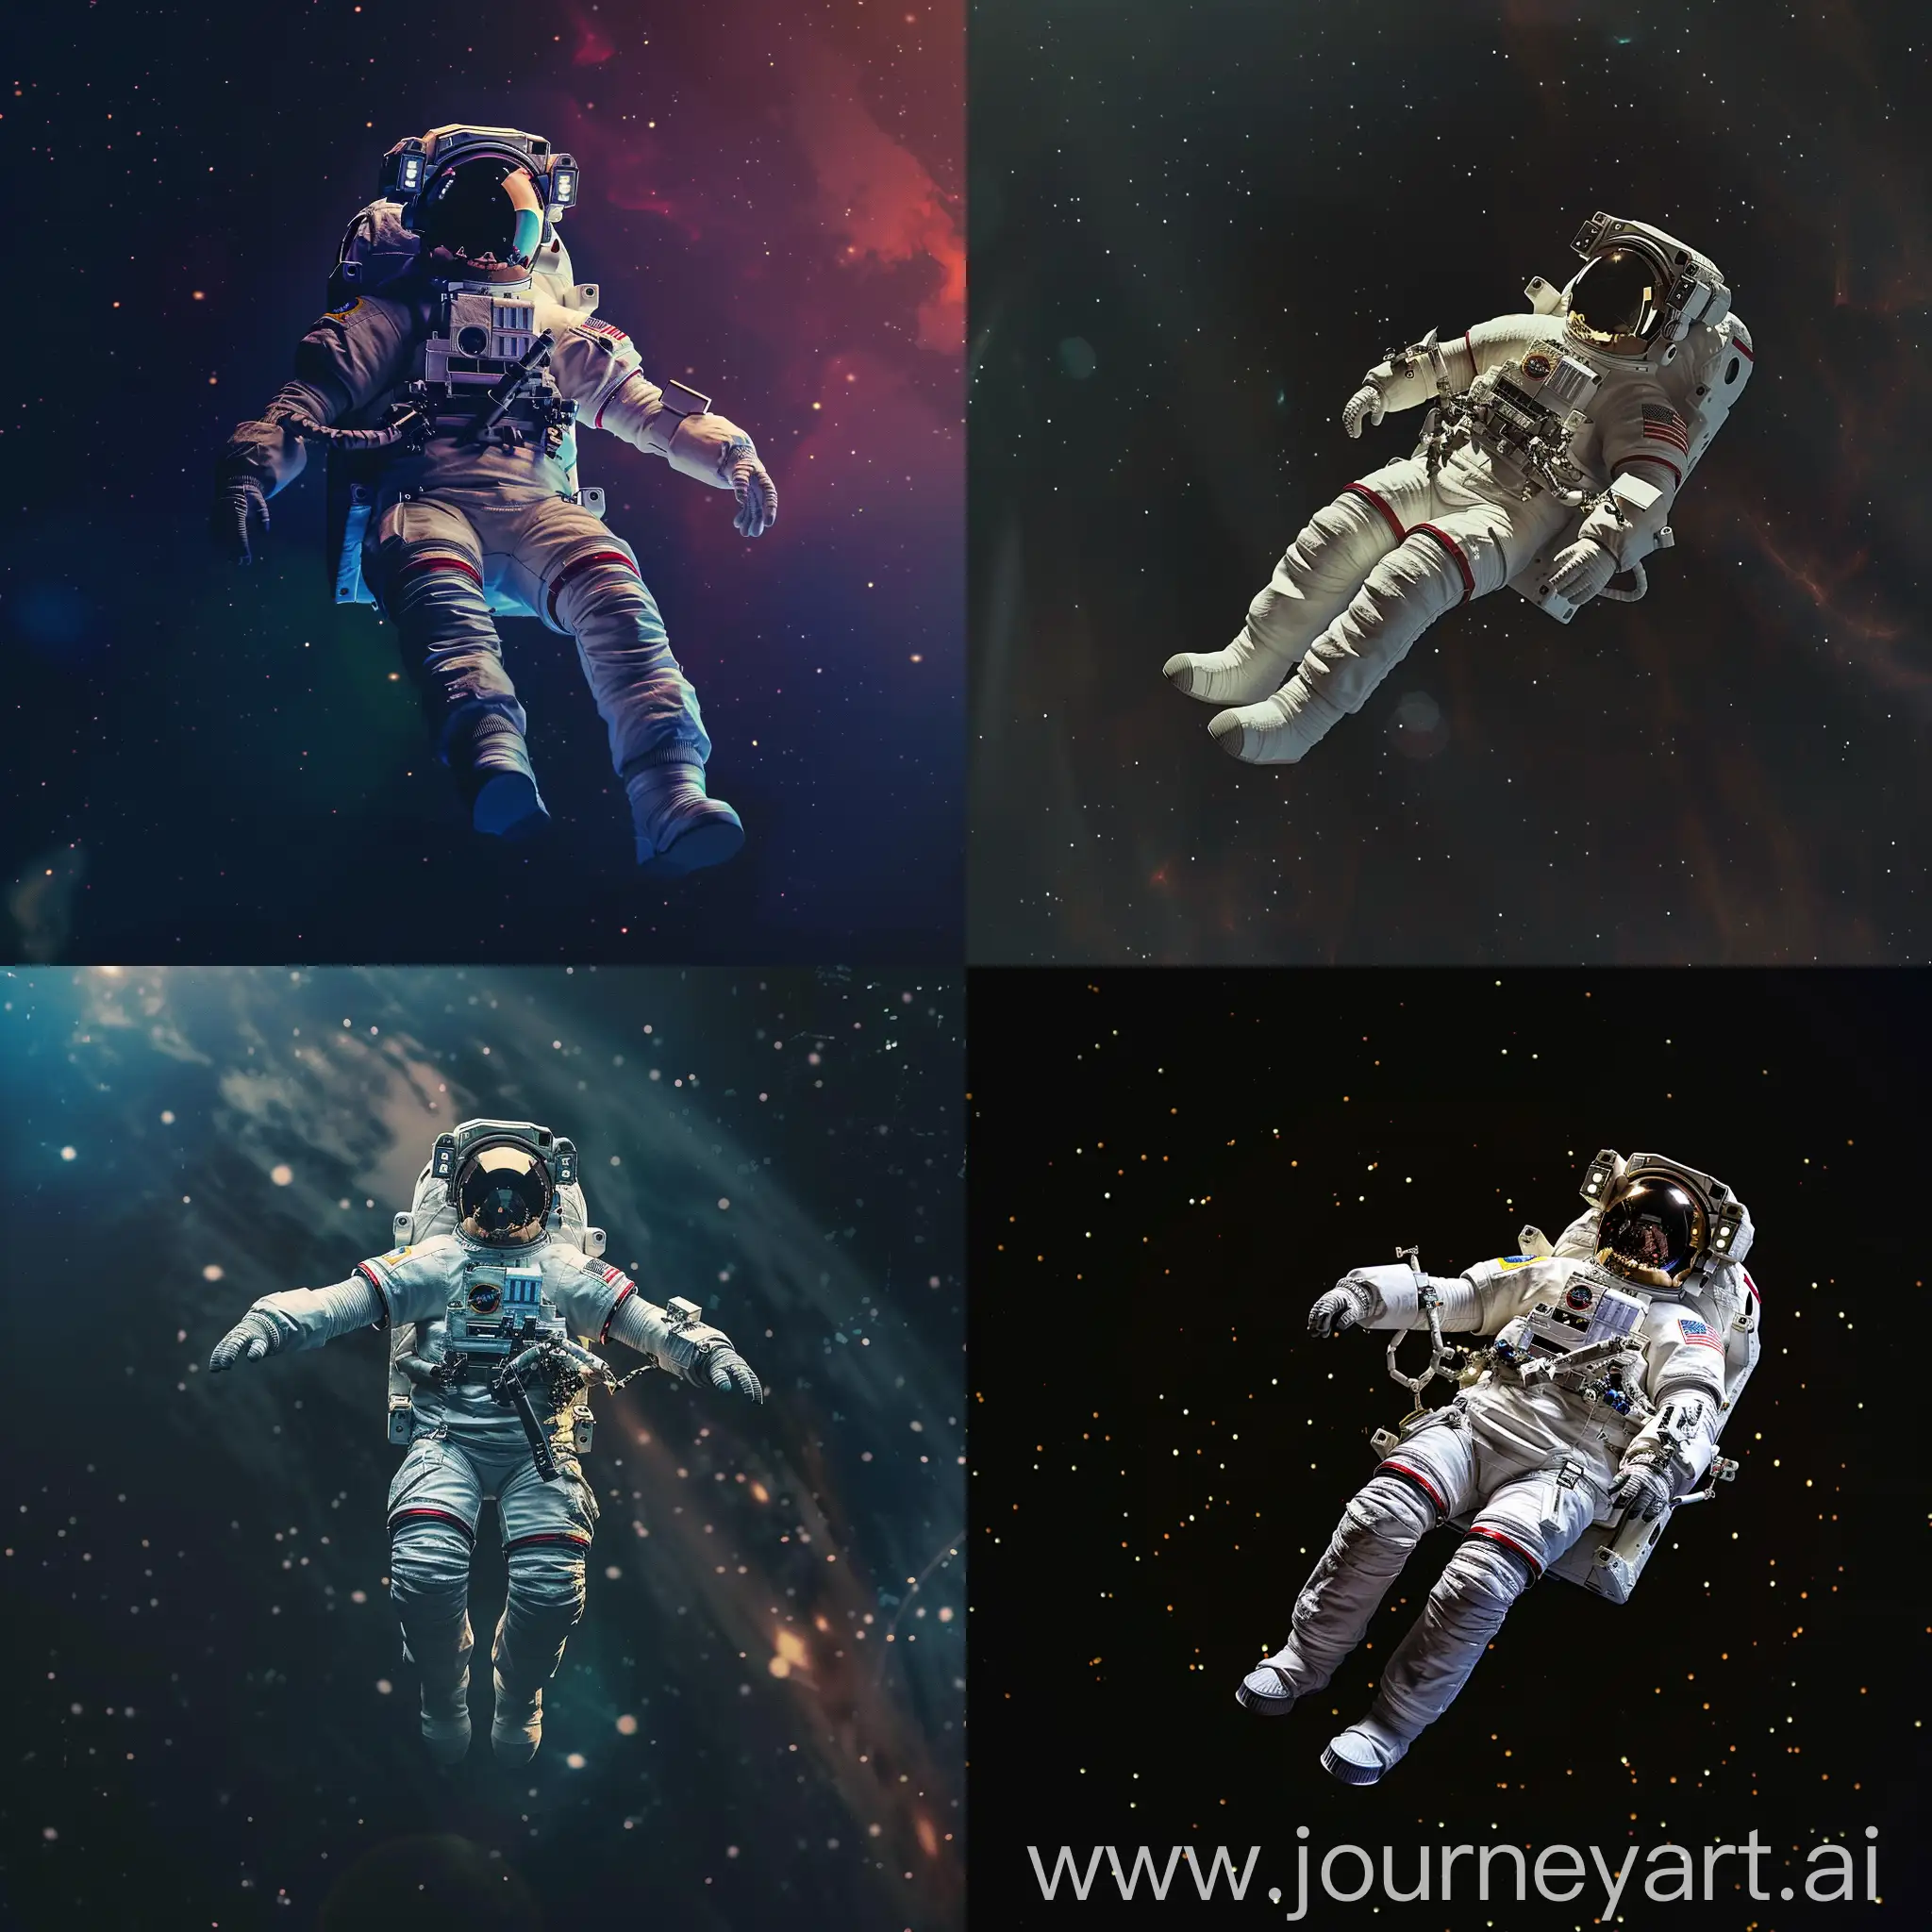 Astronaut-Floating-in-Space-Exploration-Adventure